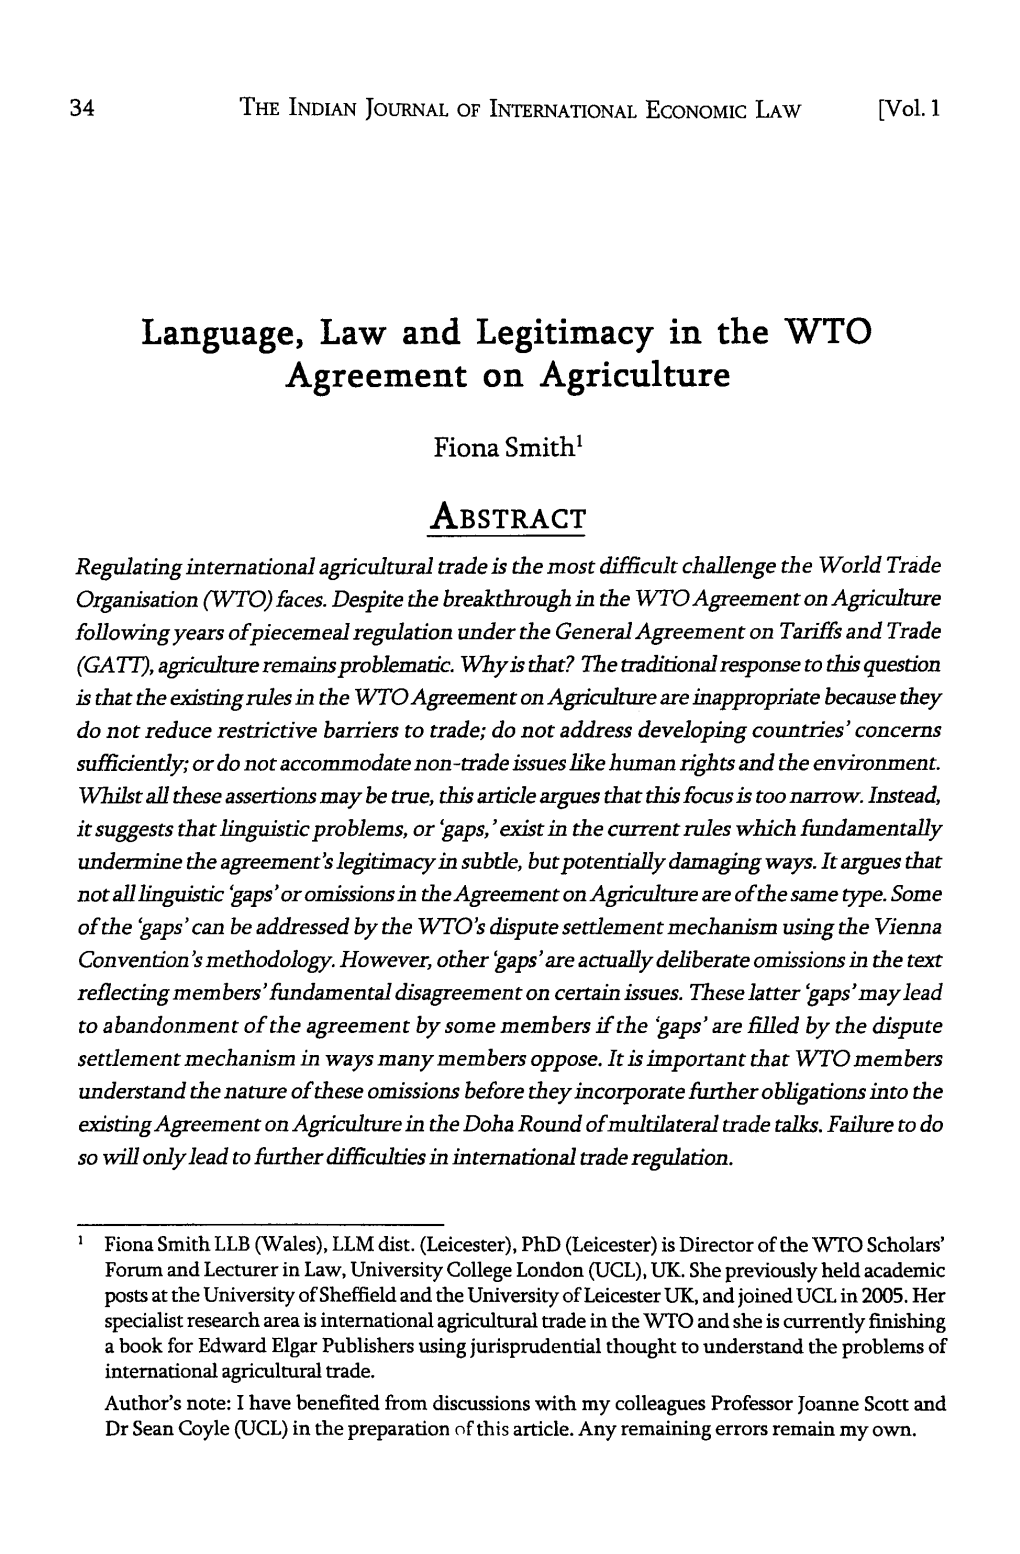 Language, Law and Legitimacy in the WTO Agreement on Agriculture